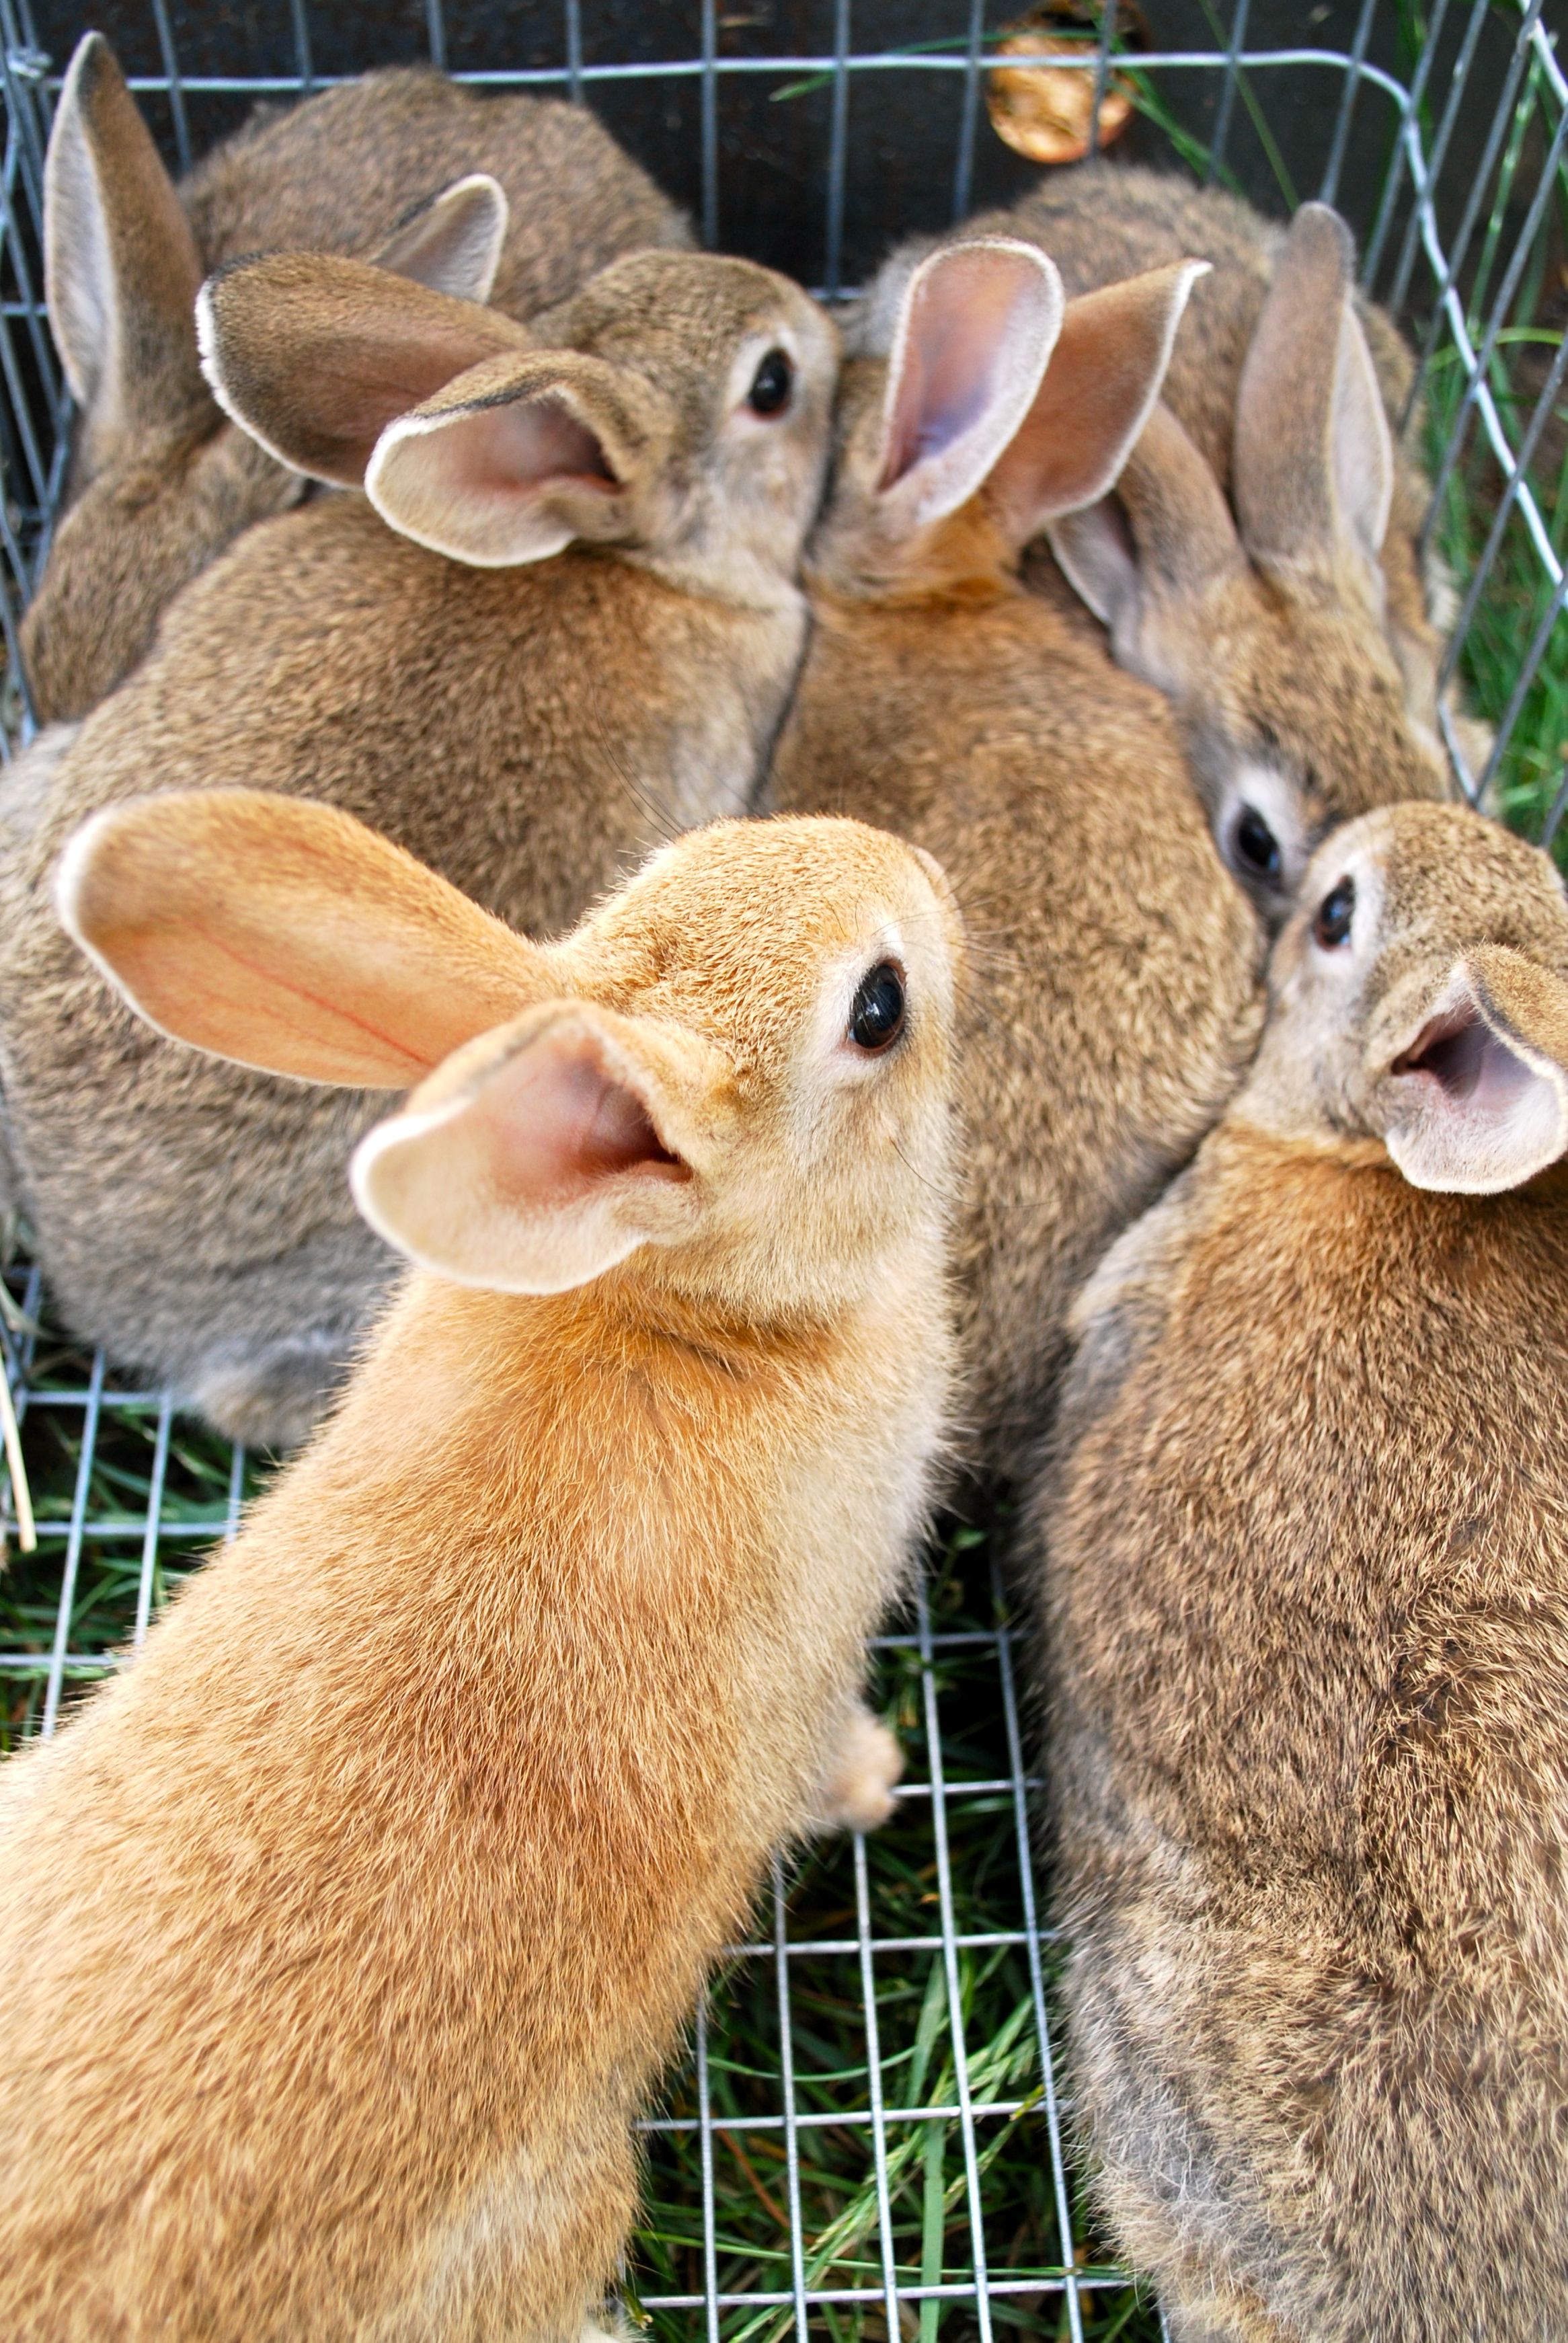 Can Rabbits Leave Mom At 6 Weeks?